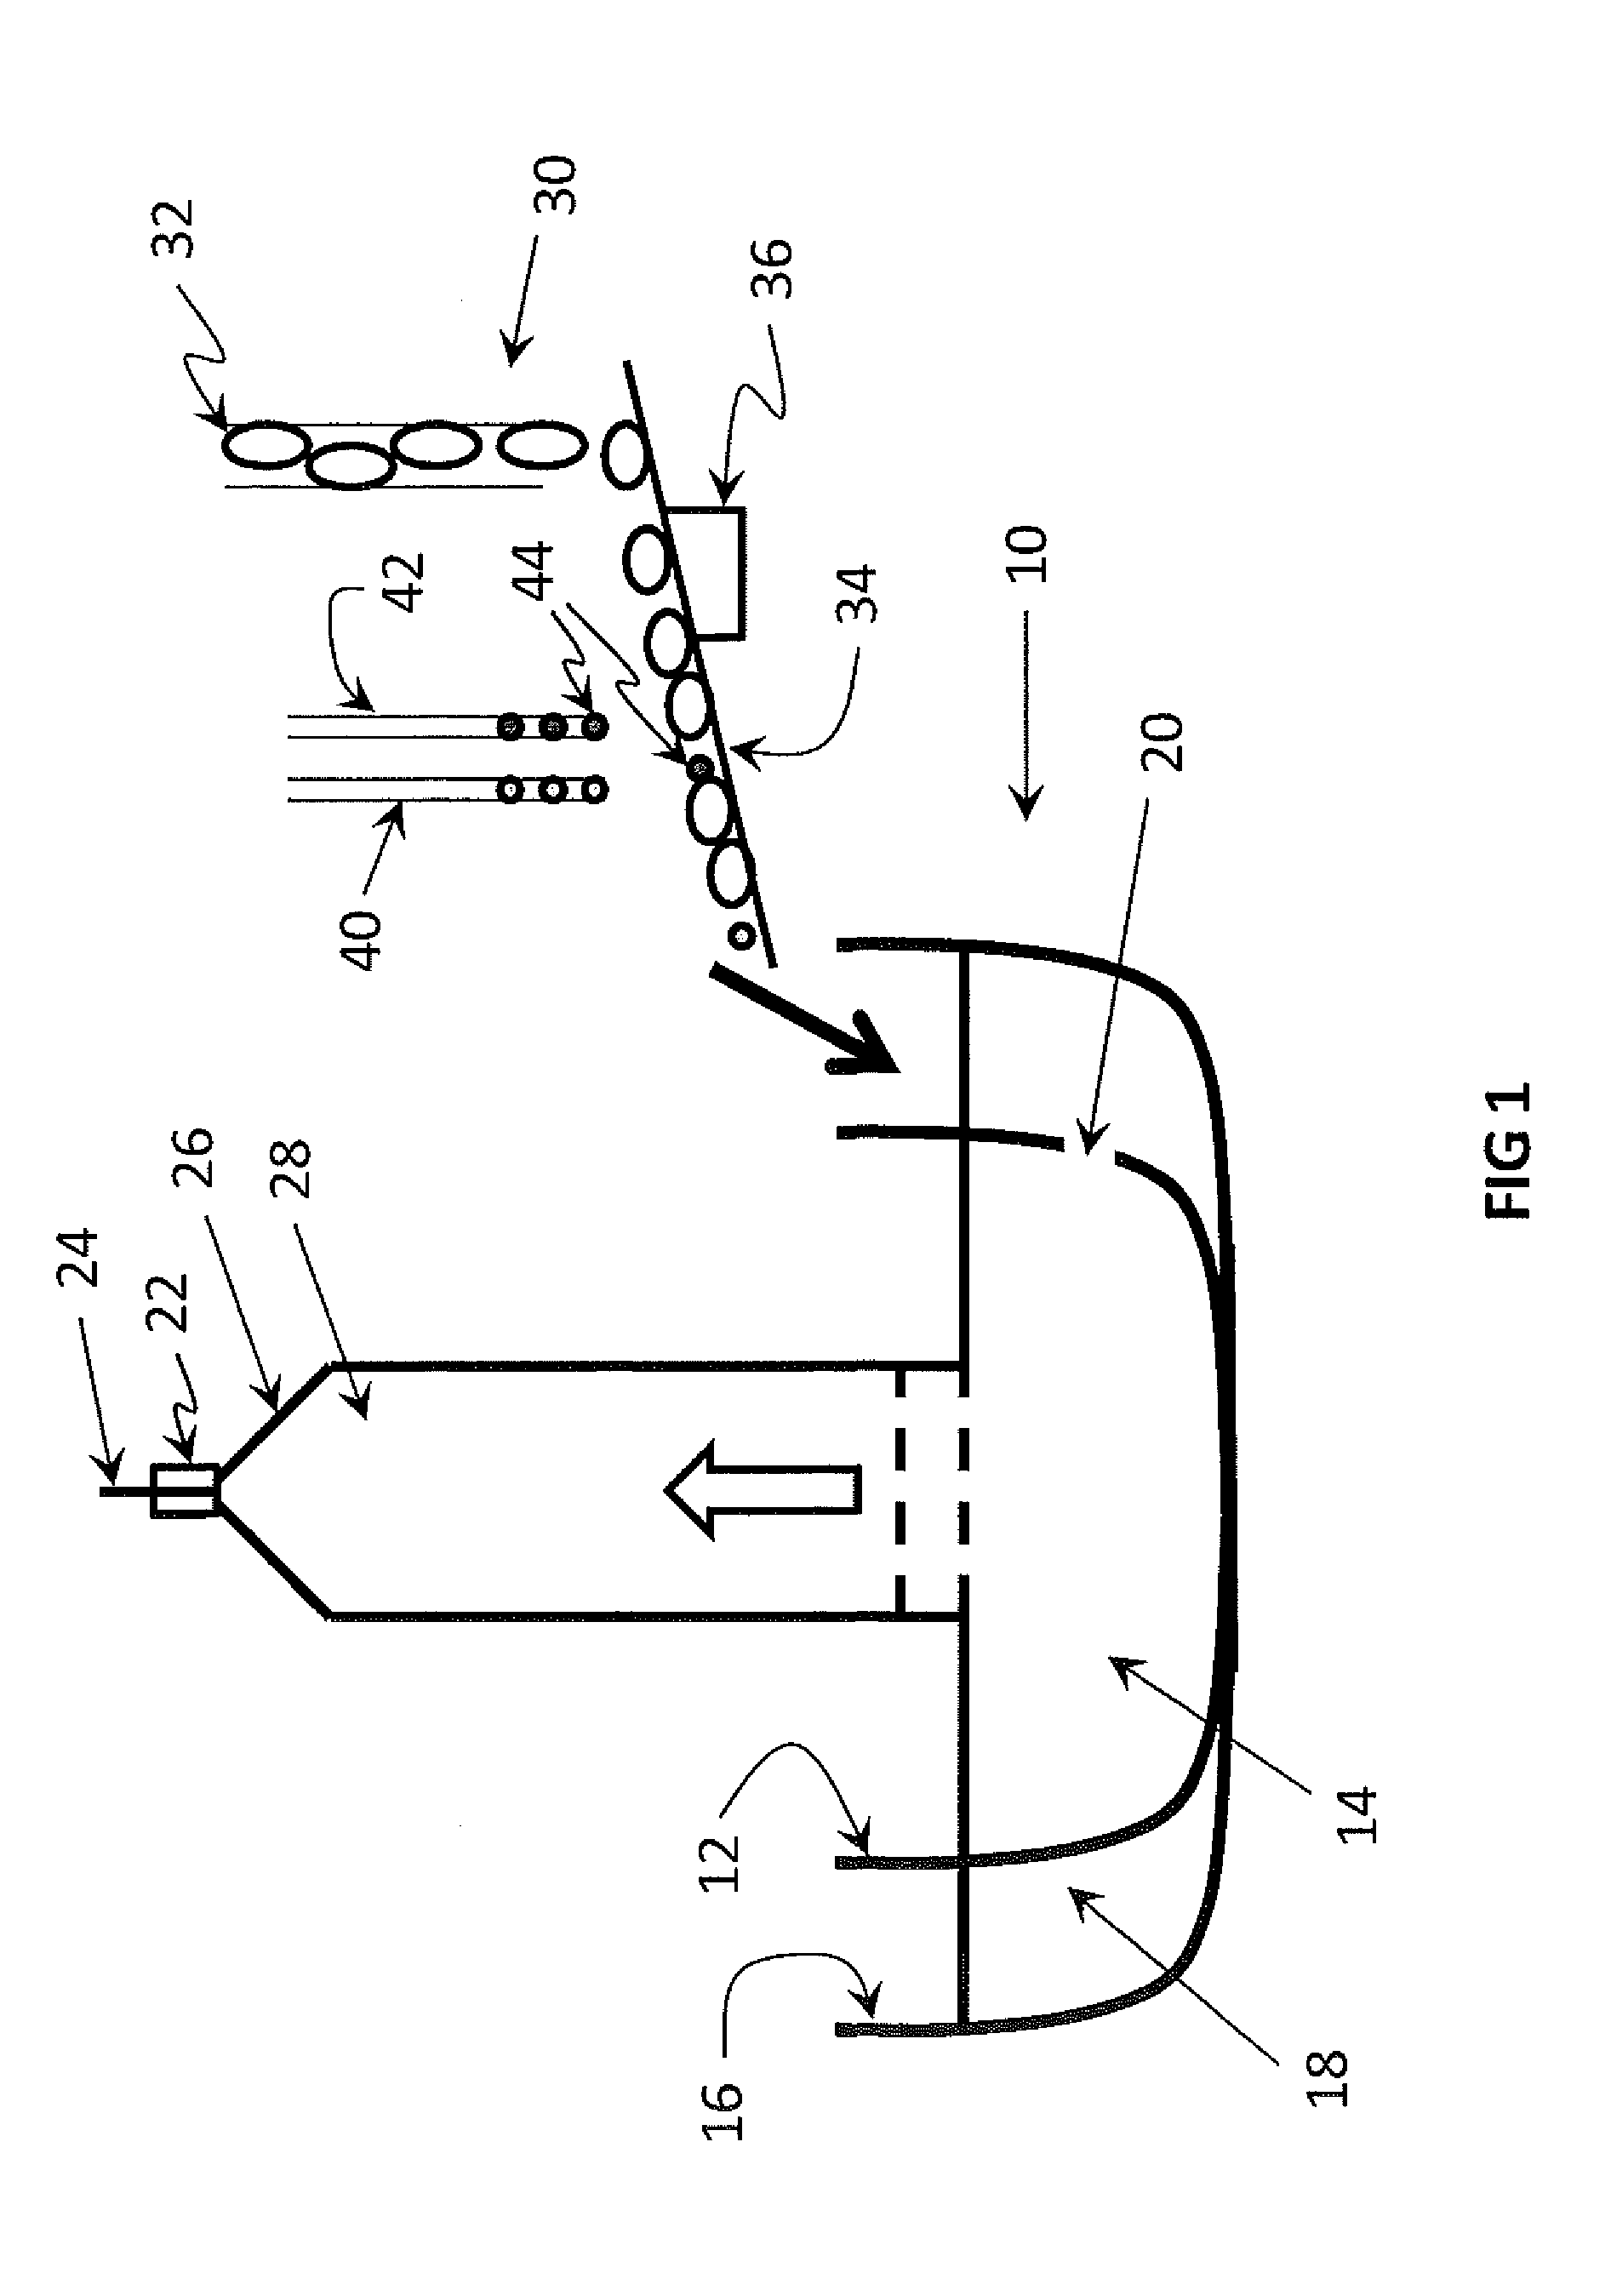 Silicon ingot having uniform multiple dopants and method and apparatus for producing same